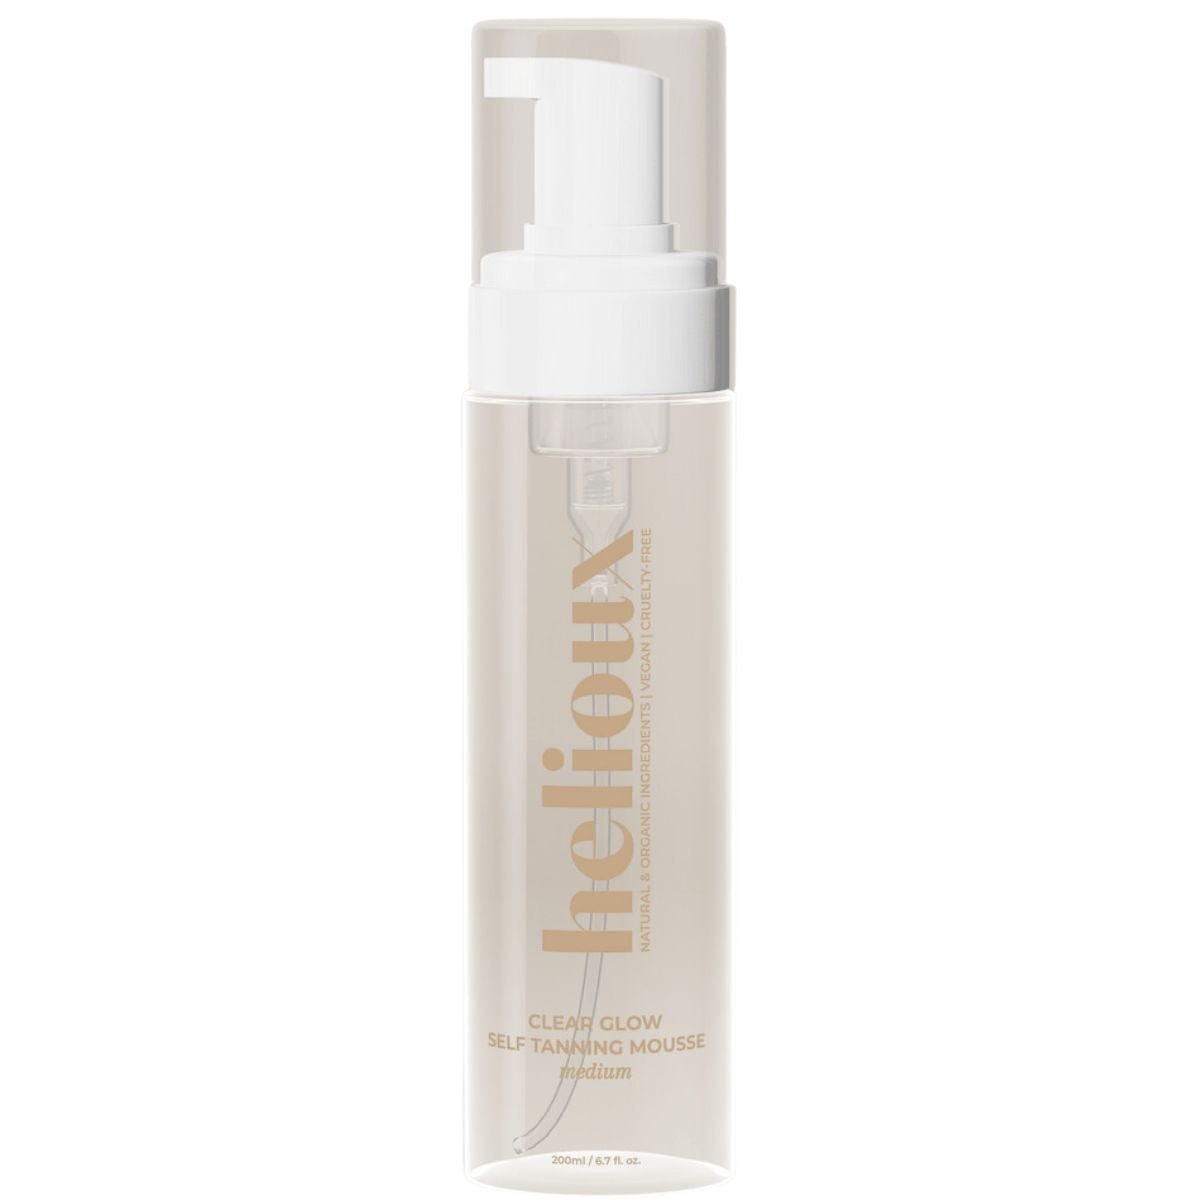 Clear Glow Self Tanning Mousse Medium